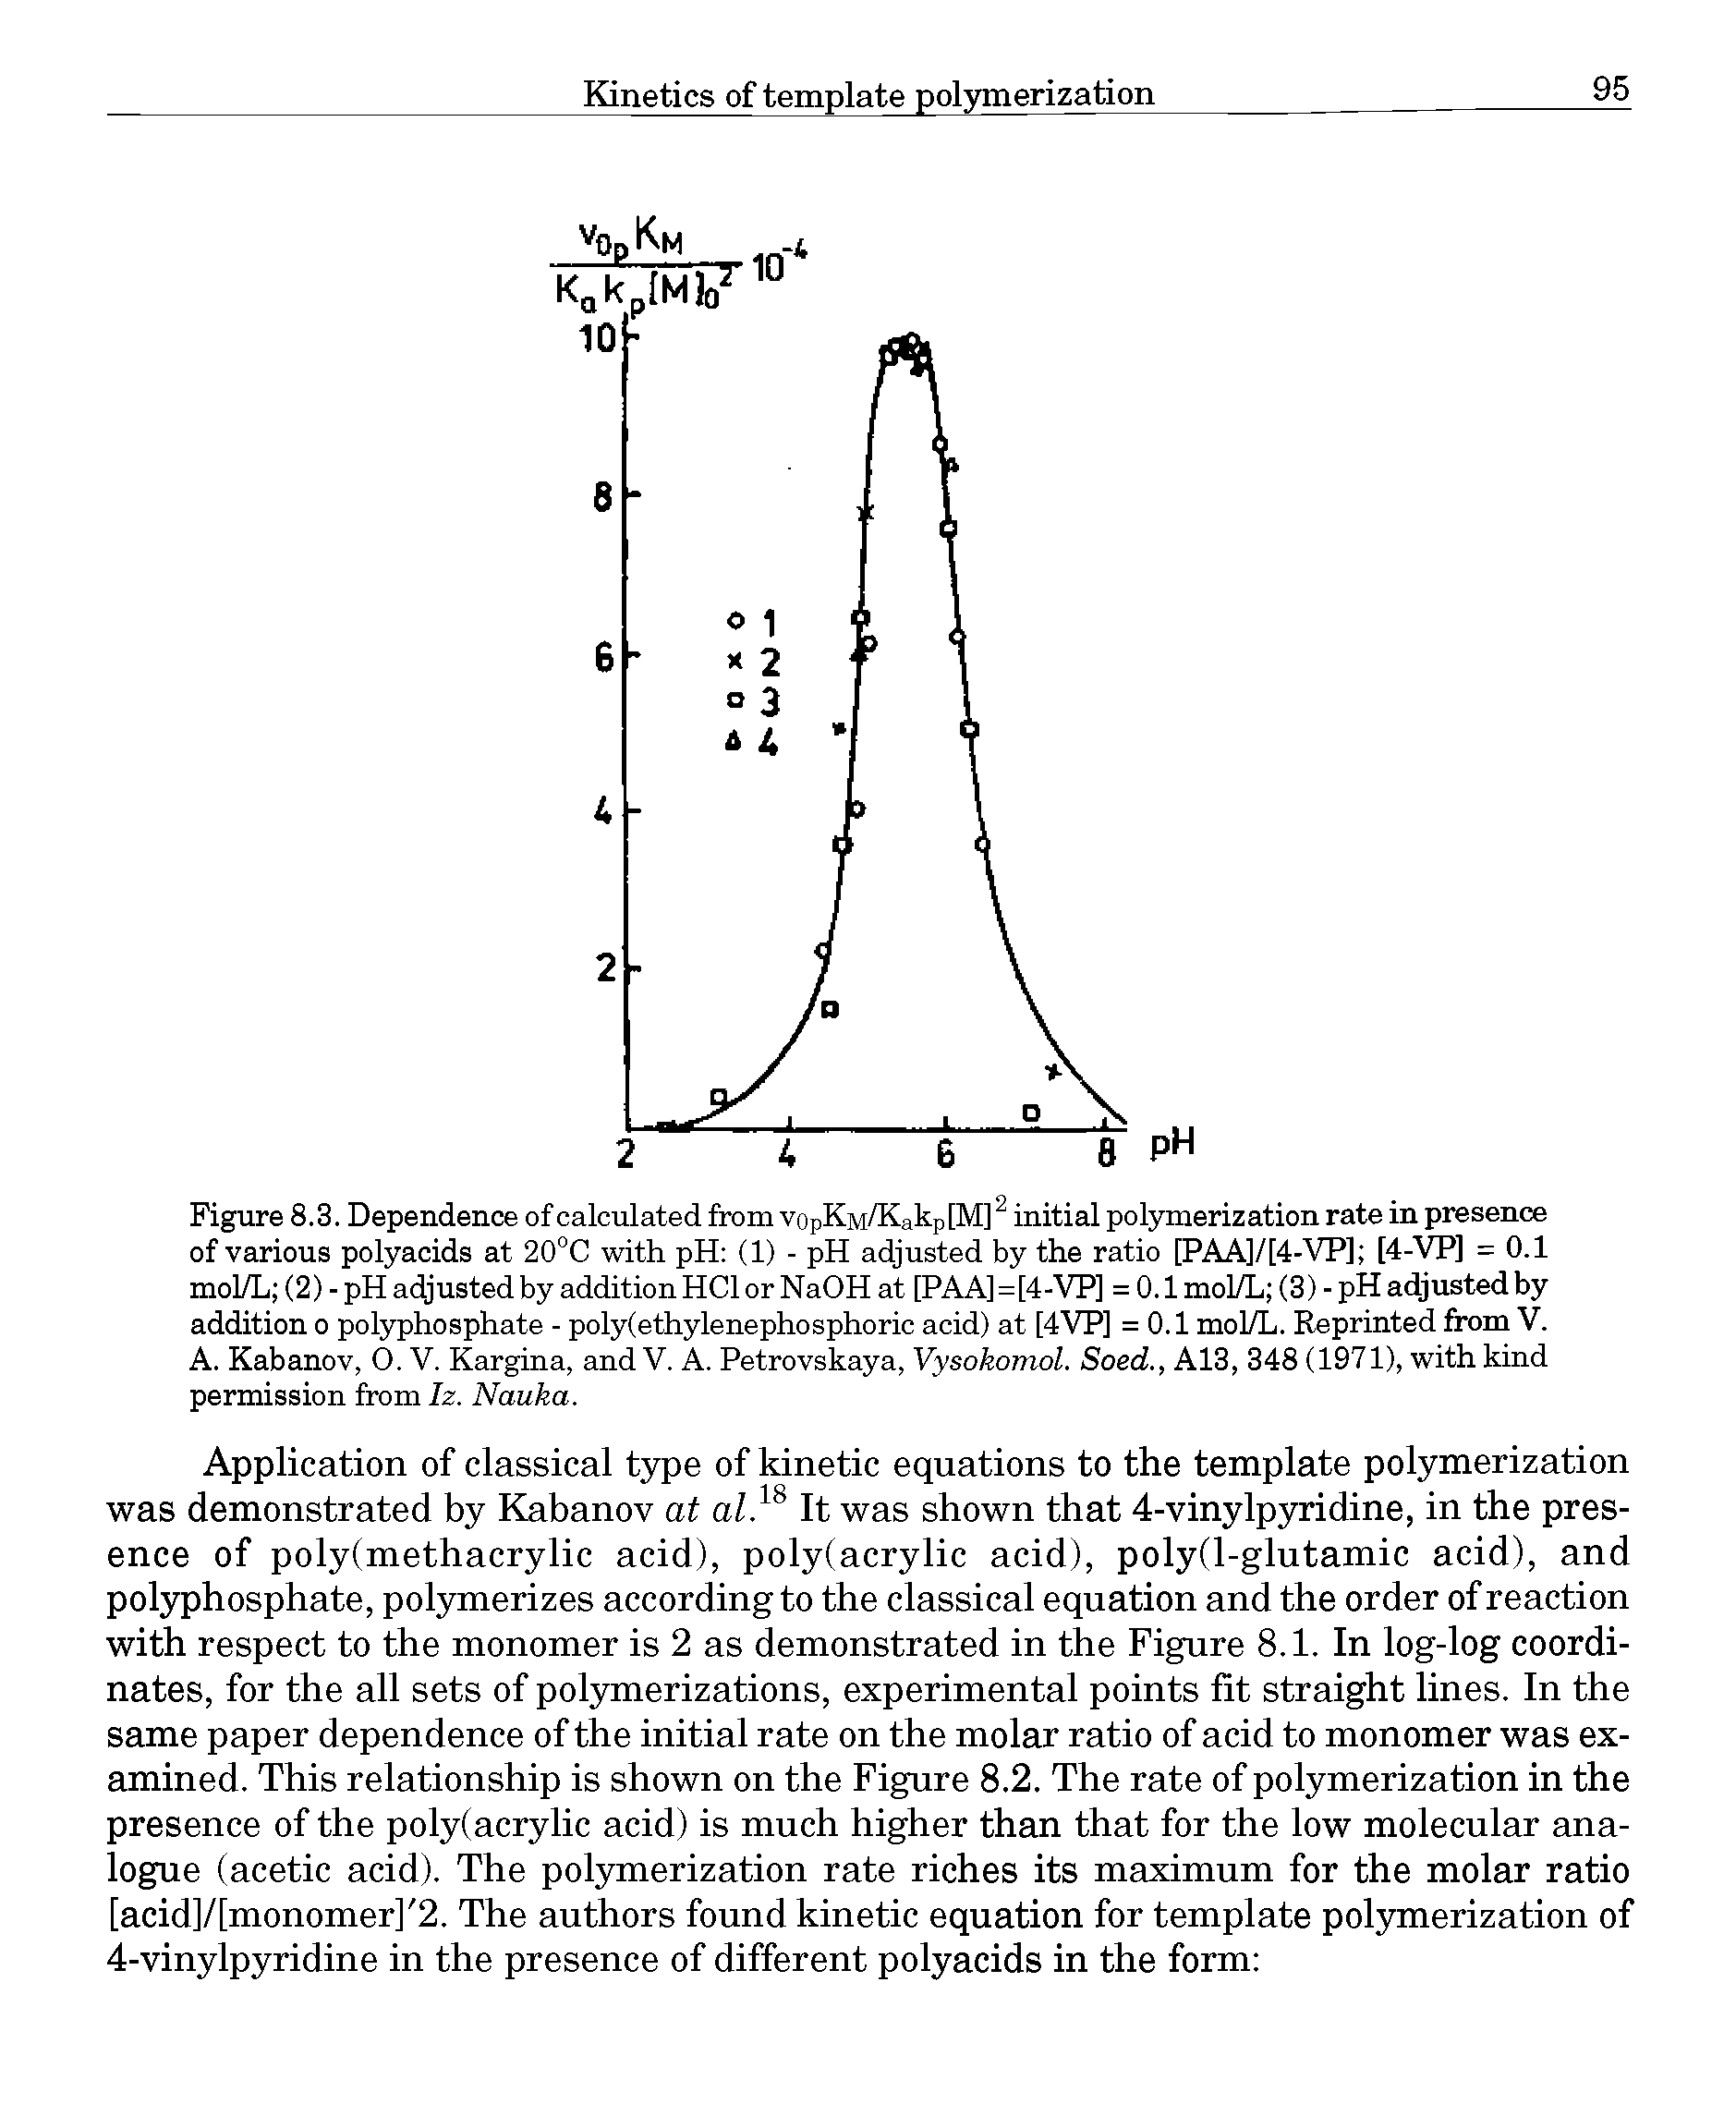 Figure 8.3. Dependence of calculated from vopKn/KakplM] initial polymerization rate in presence of various polyacids at 20°C with pH (1) - pH adjusted by the ratio [PAA]/[4-VP] [4-VP] = 0.1 mol/L (2) - pH adjusted by addition HCl or NaOH at [PAA]=[4-VP] =0.1 mol/L (3) - pH adjusted by addition o polyphosphate - poly(ethylenephosphoric acid) at [4VP] =0.1 mol/L. Reprinted from V.